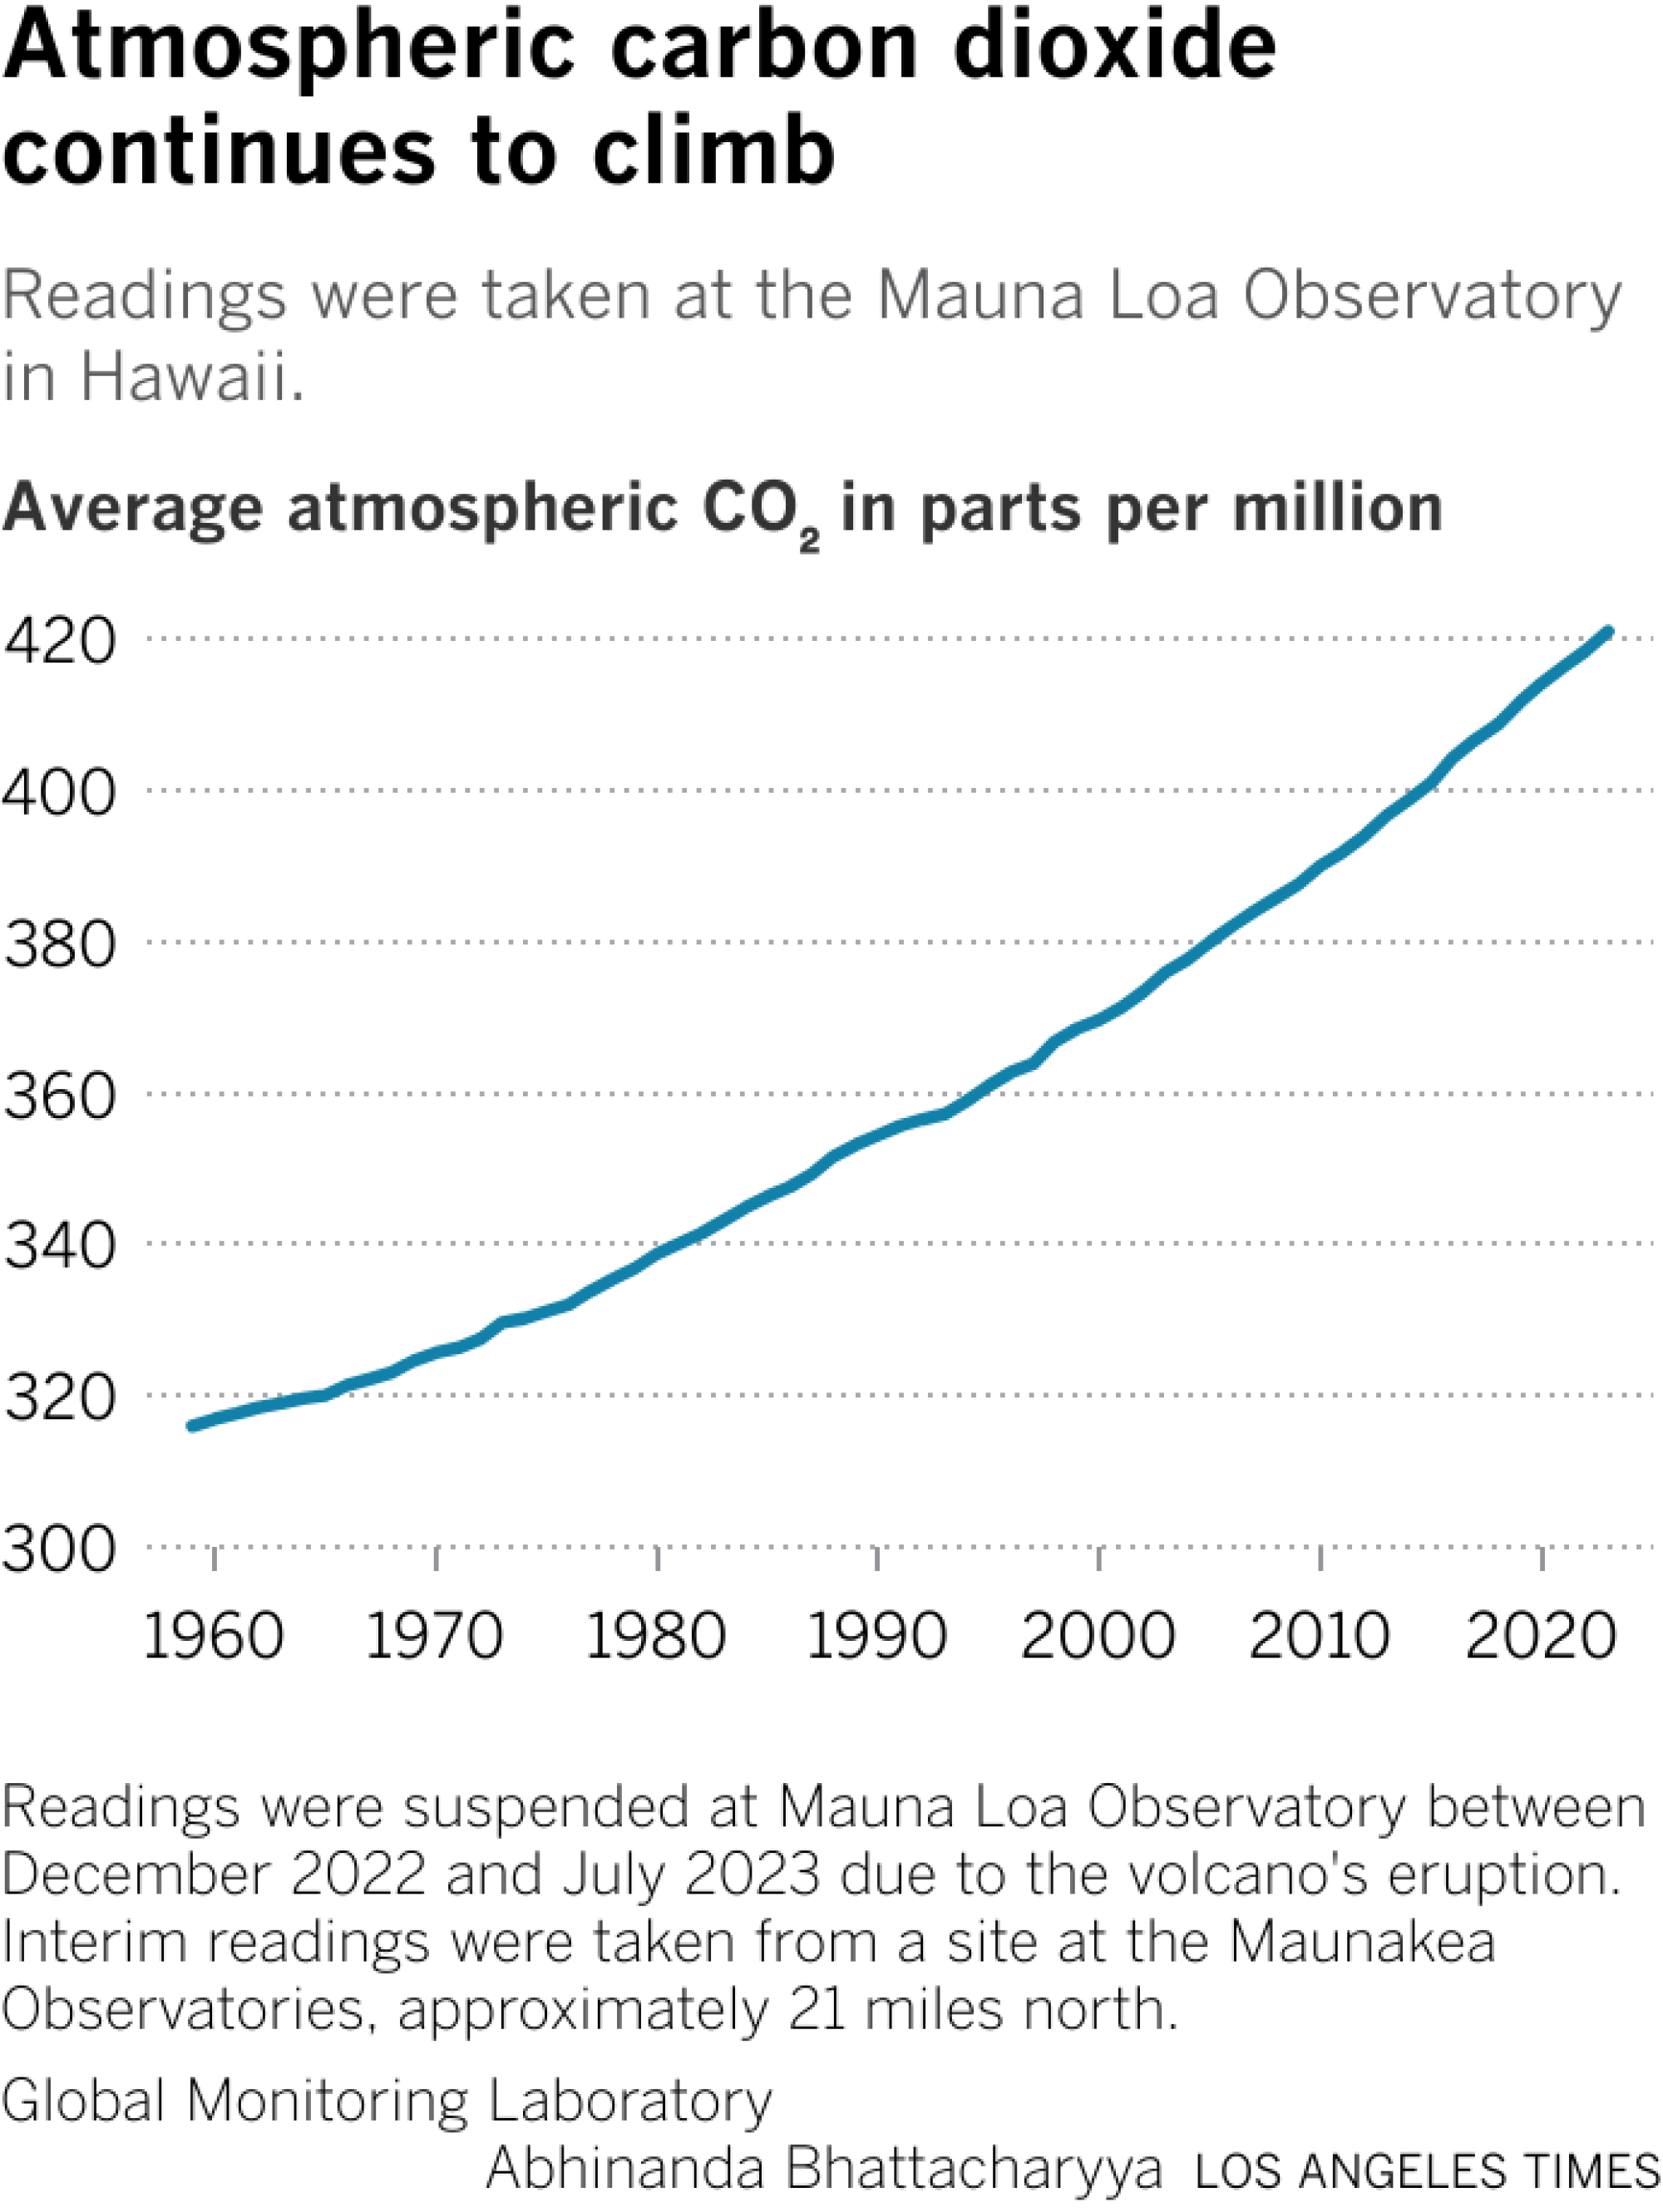 A line graph showing the steady increase in atmospheric carbon dioxide since 1958.